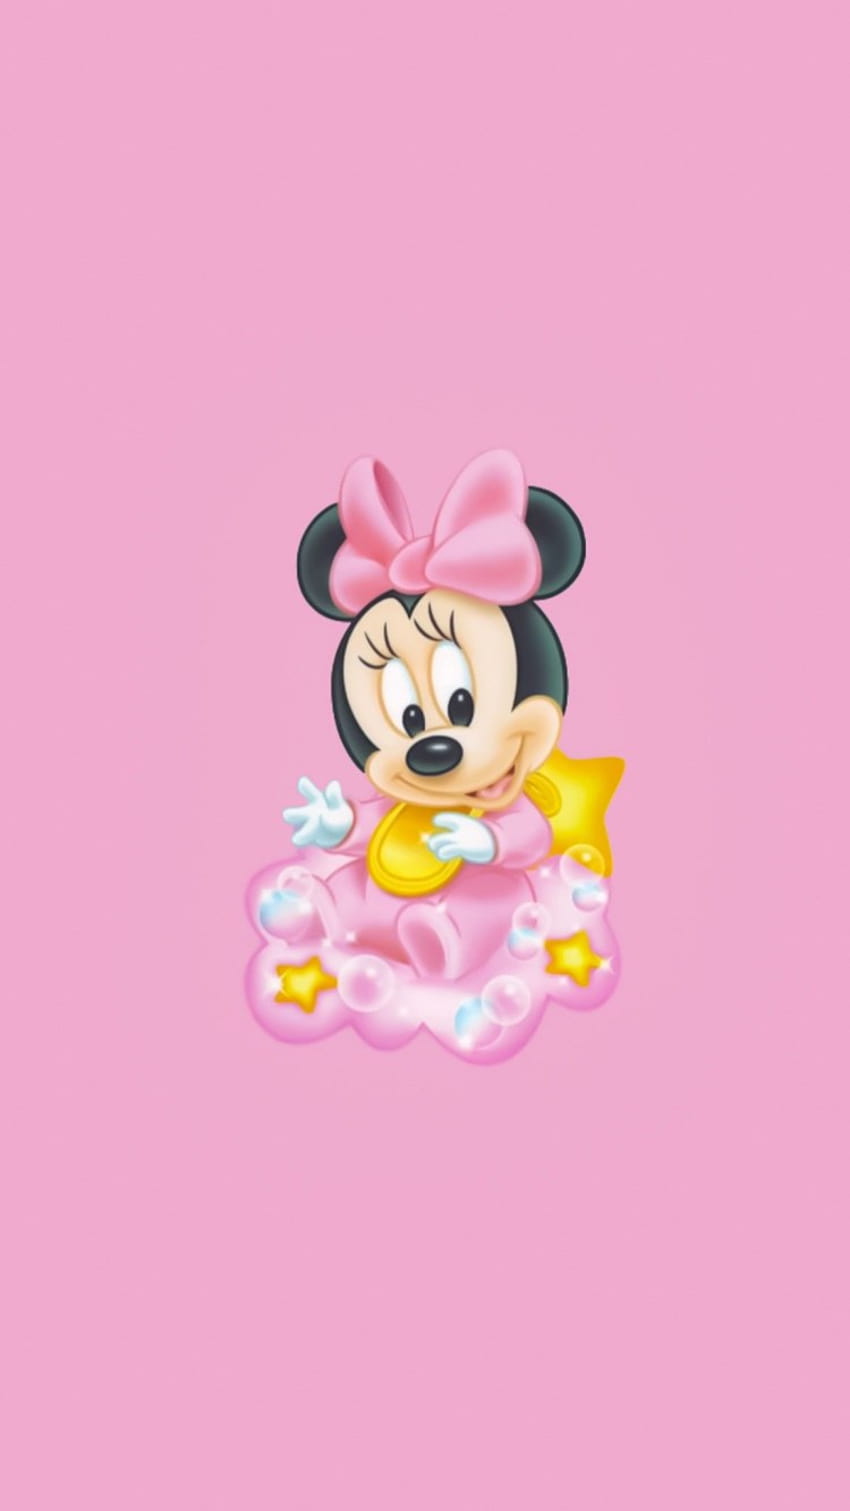 IPhone wallpaper of baby Minnie Mouse on a pink background - Minnie Mouse